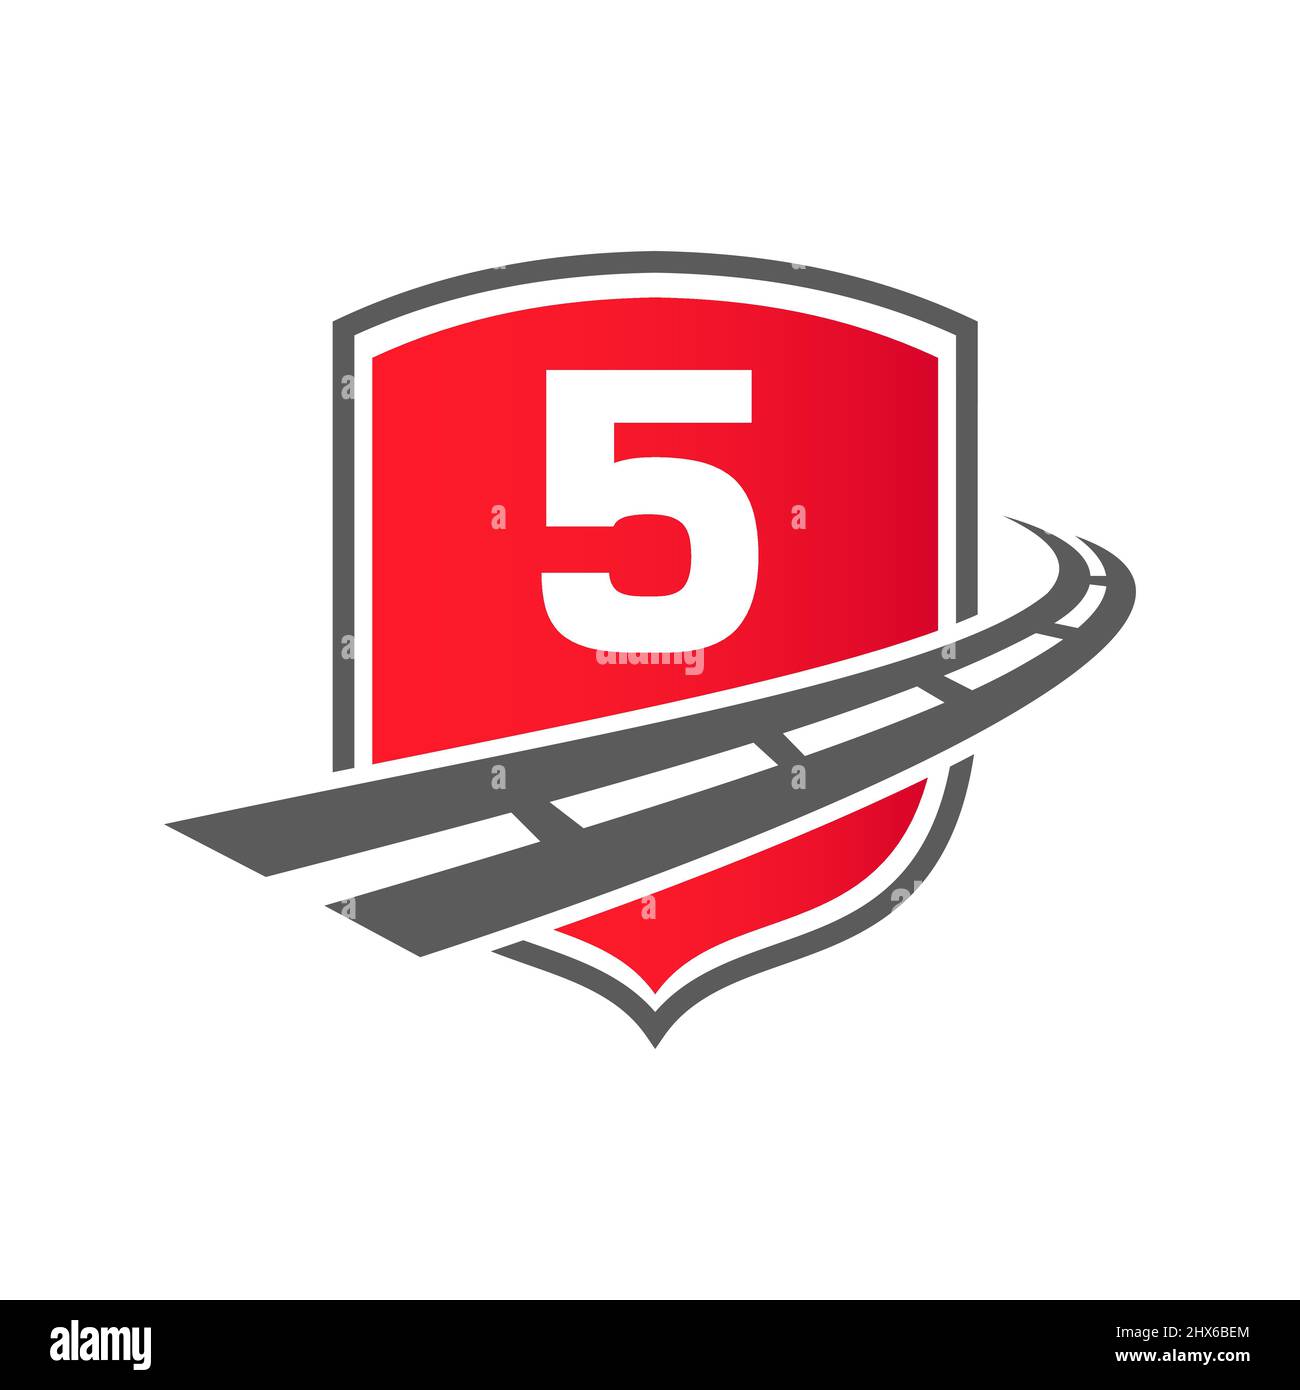 Transport Logo With Shield Concept On Letter 5 Concept. 5 Letter Transportation Road Logo Design Freight Template Stock Vector